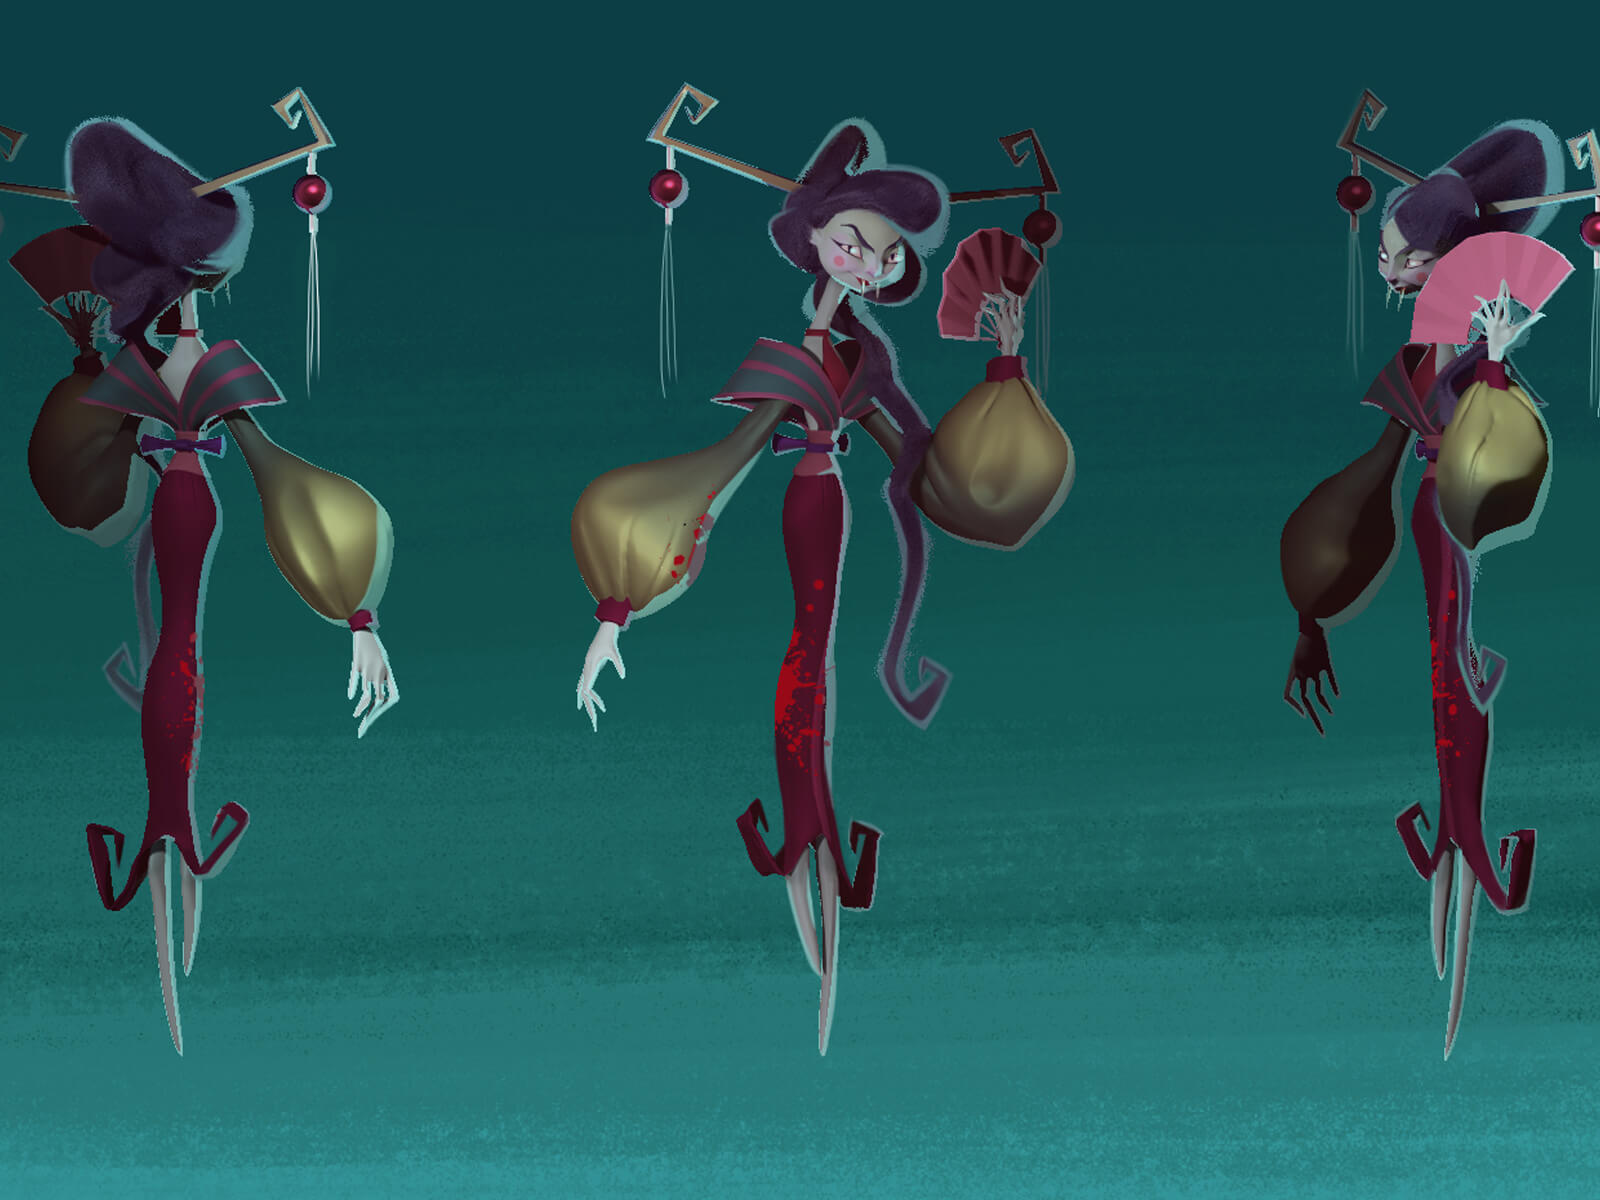 computer-generated 3D model of a female character carrying a fan with 3 views: back, head-on, and partial profile